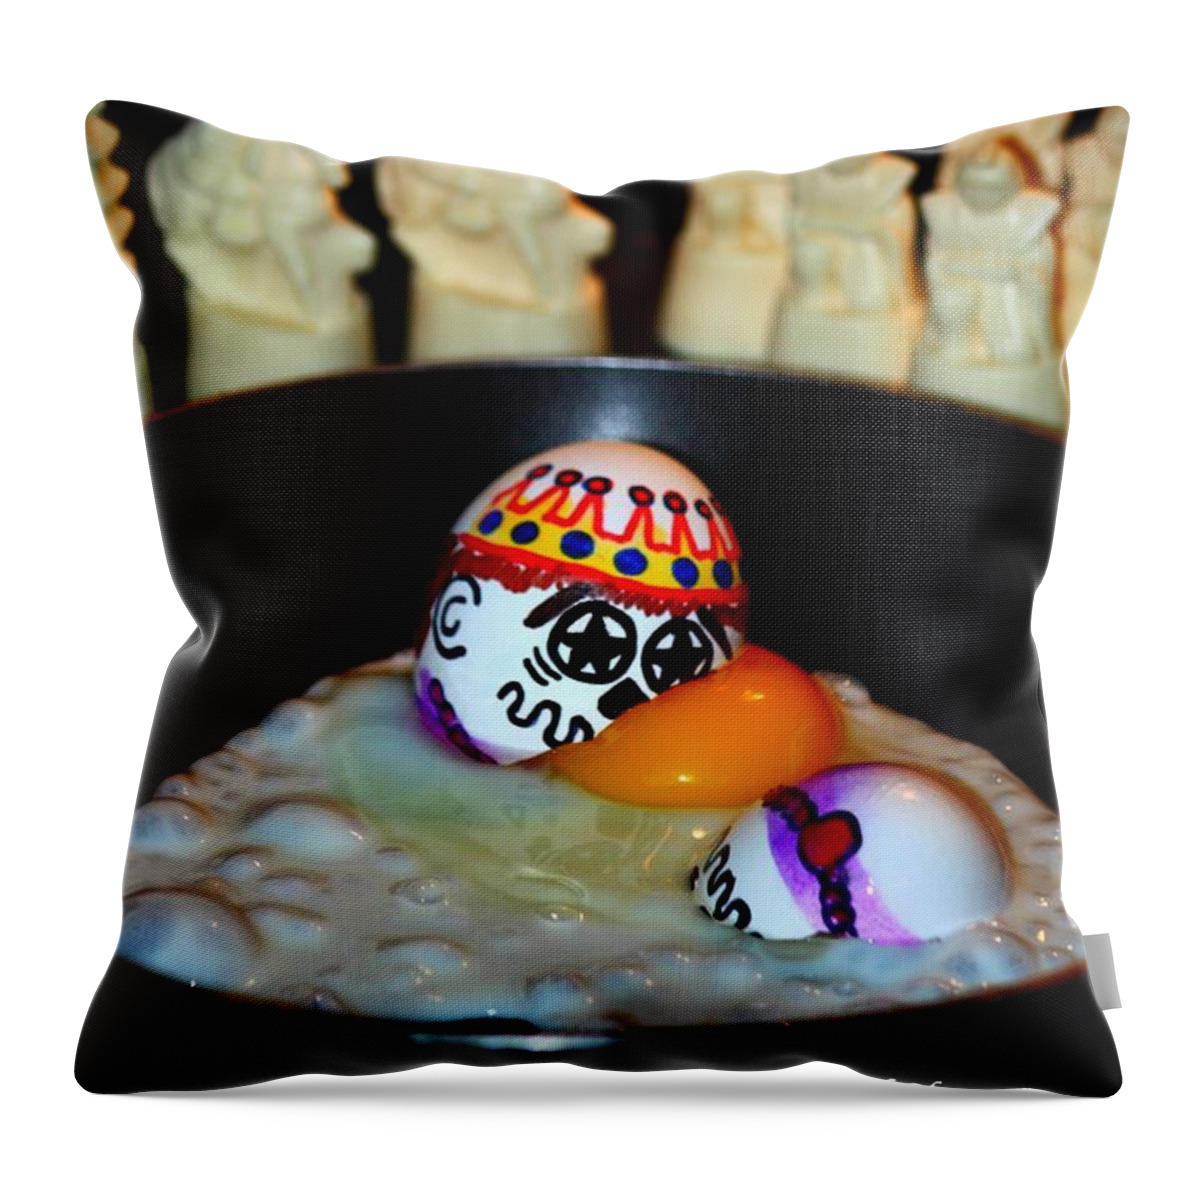 Twisted Rhymes Throw Pillow featuring the photograph Twisted Rhymes by Patrick Witz